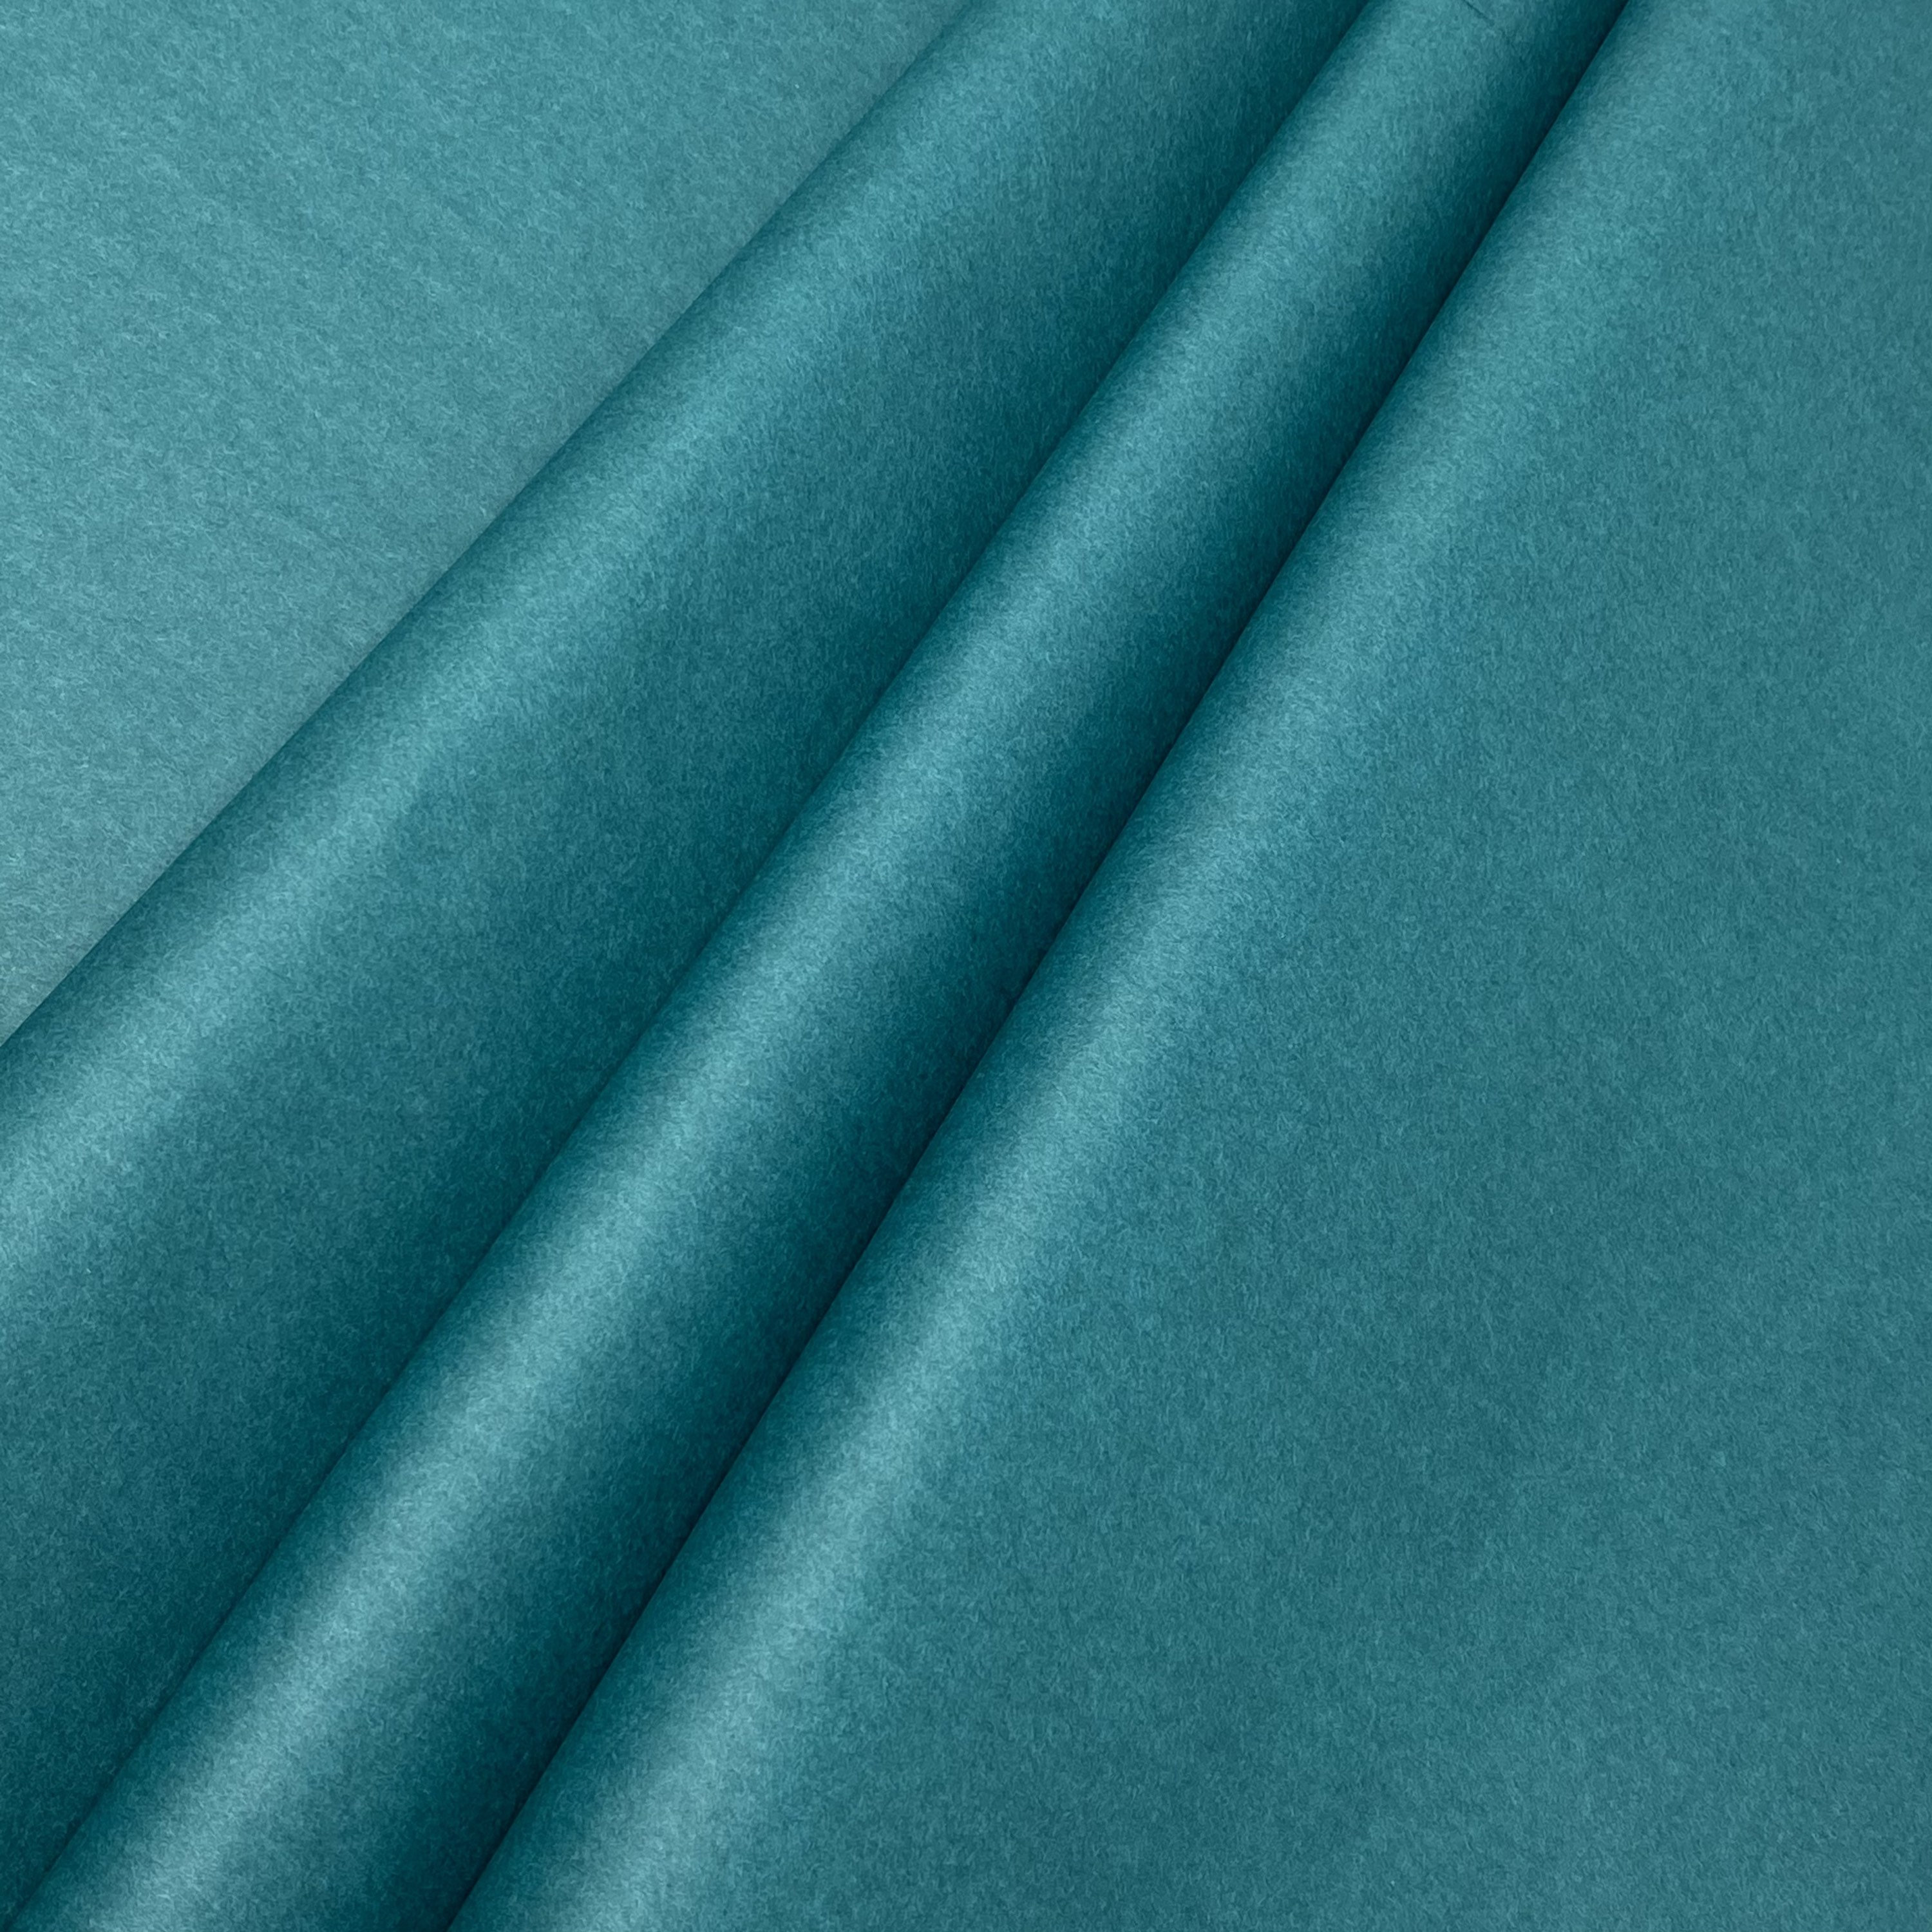 Teal Tissue Paper 20 Inch X 30 Inch Sheets Premium Gift Wrap Paper